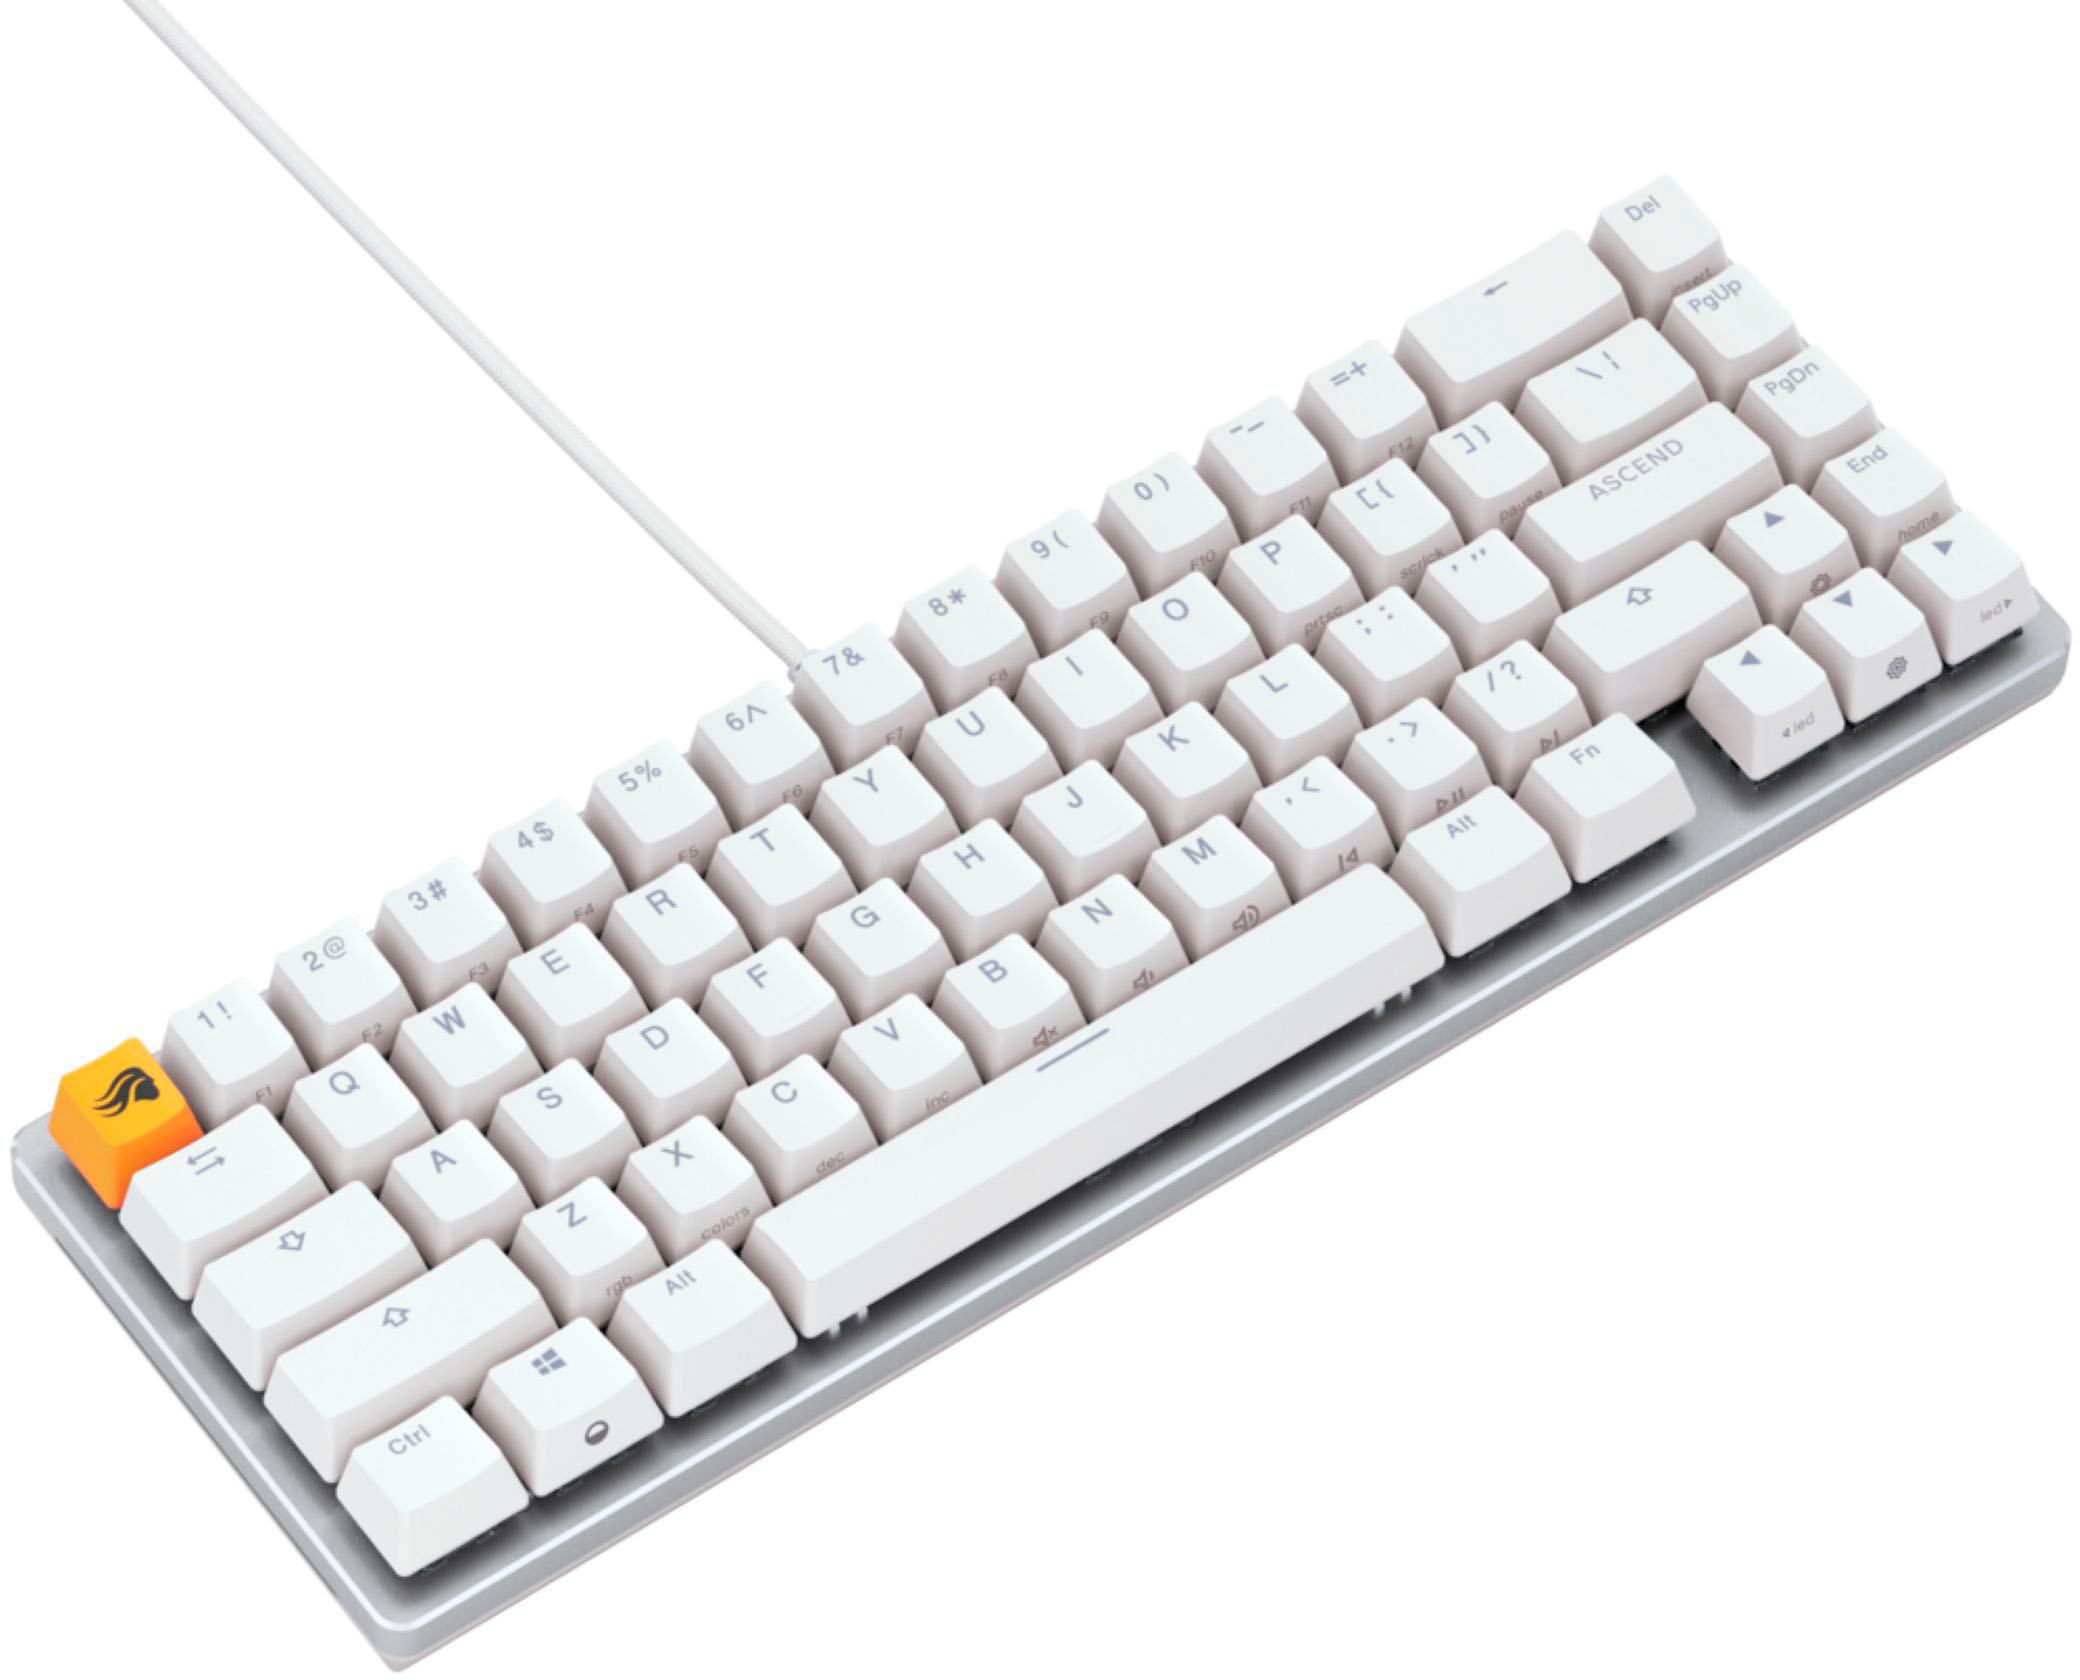 Angle View: Digital Innovations - 4250400 Full-size Wired Easy-View Keyboard - Black